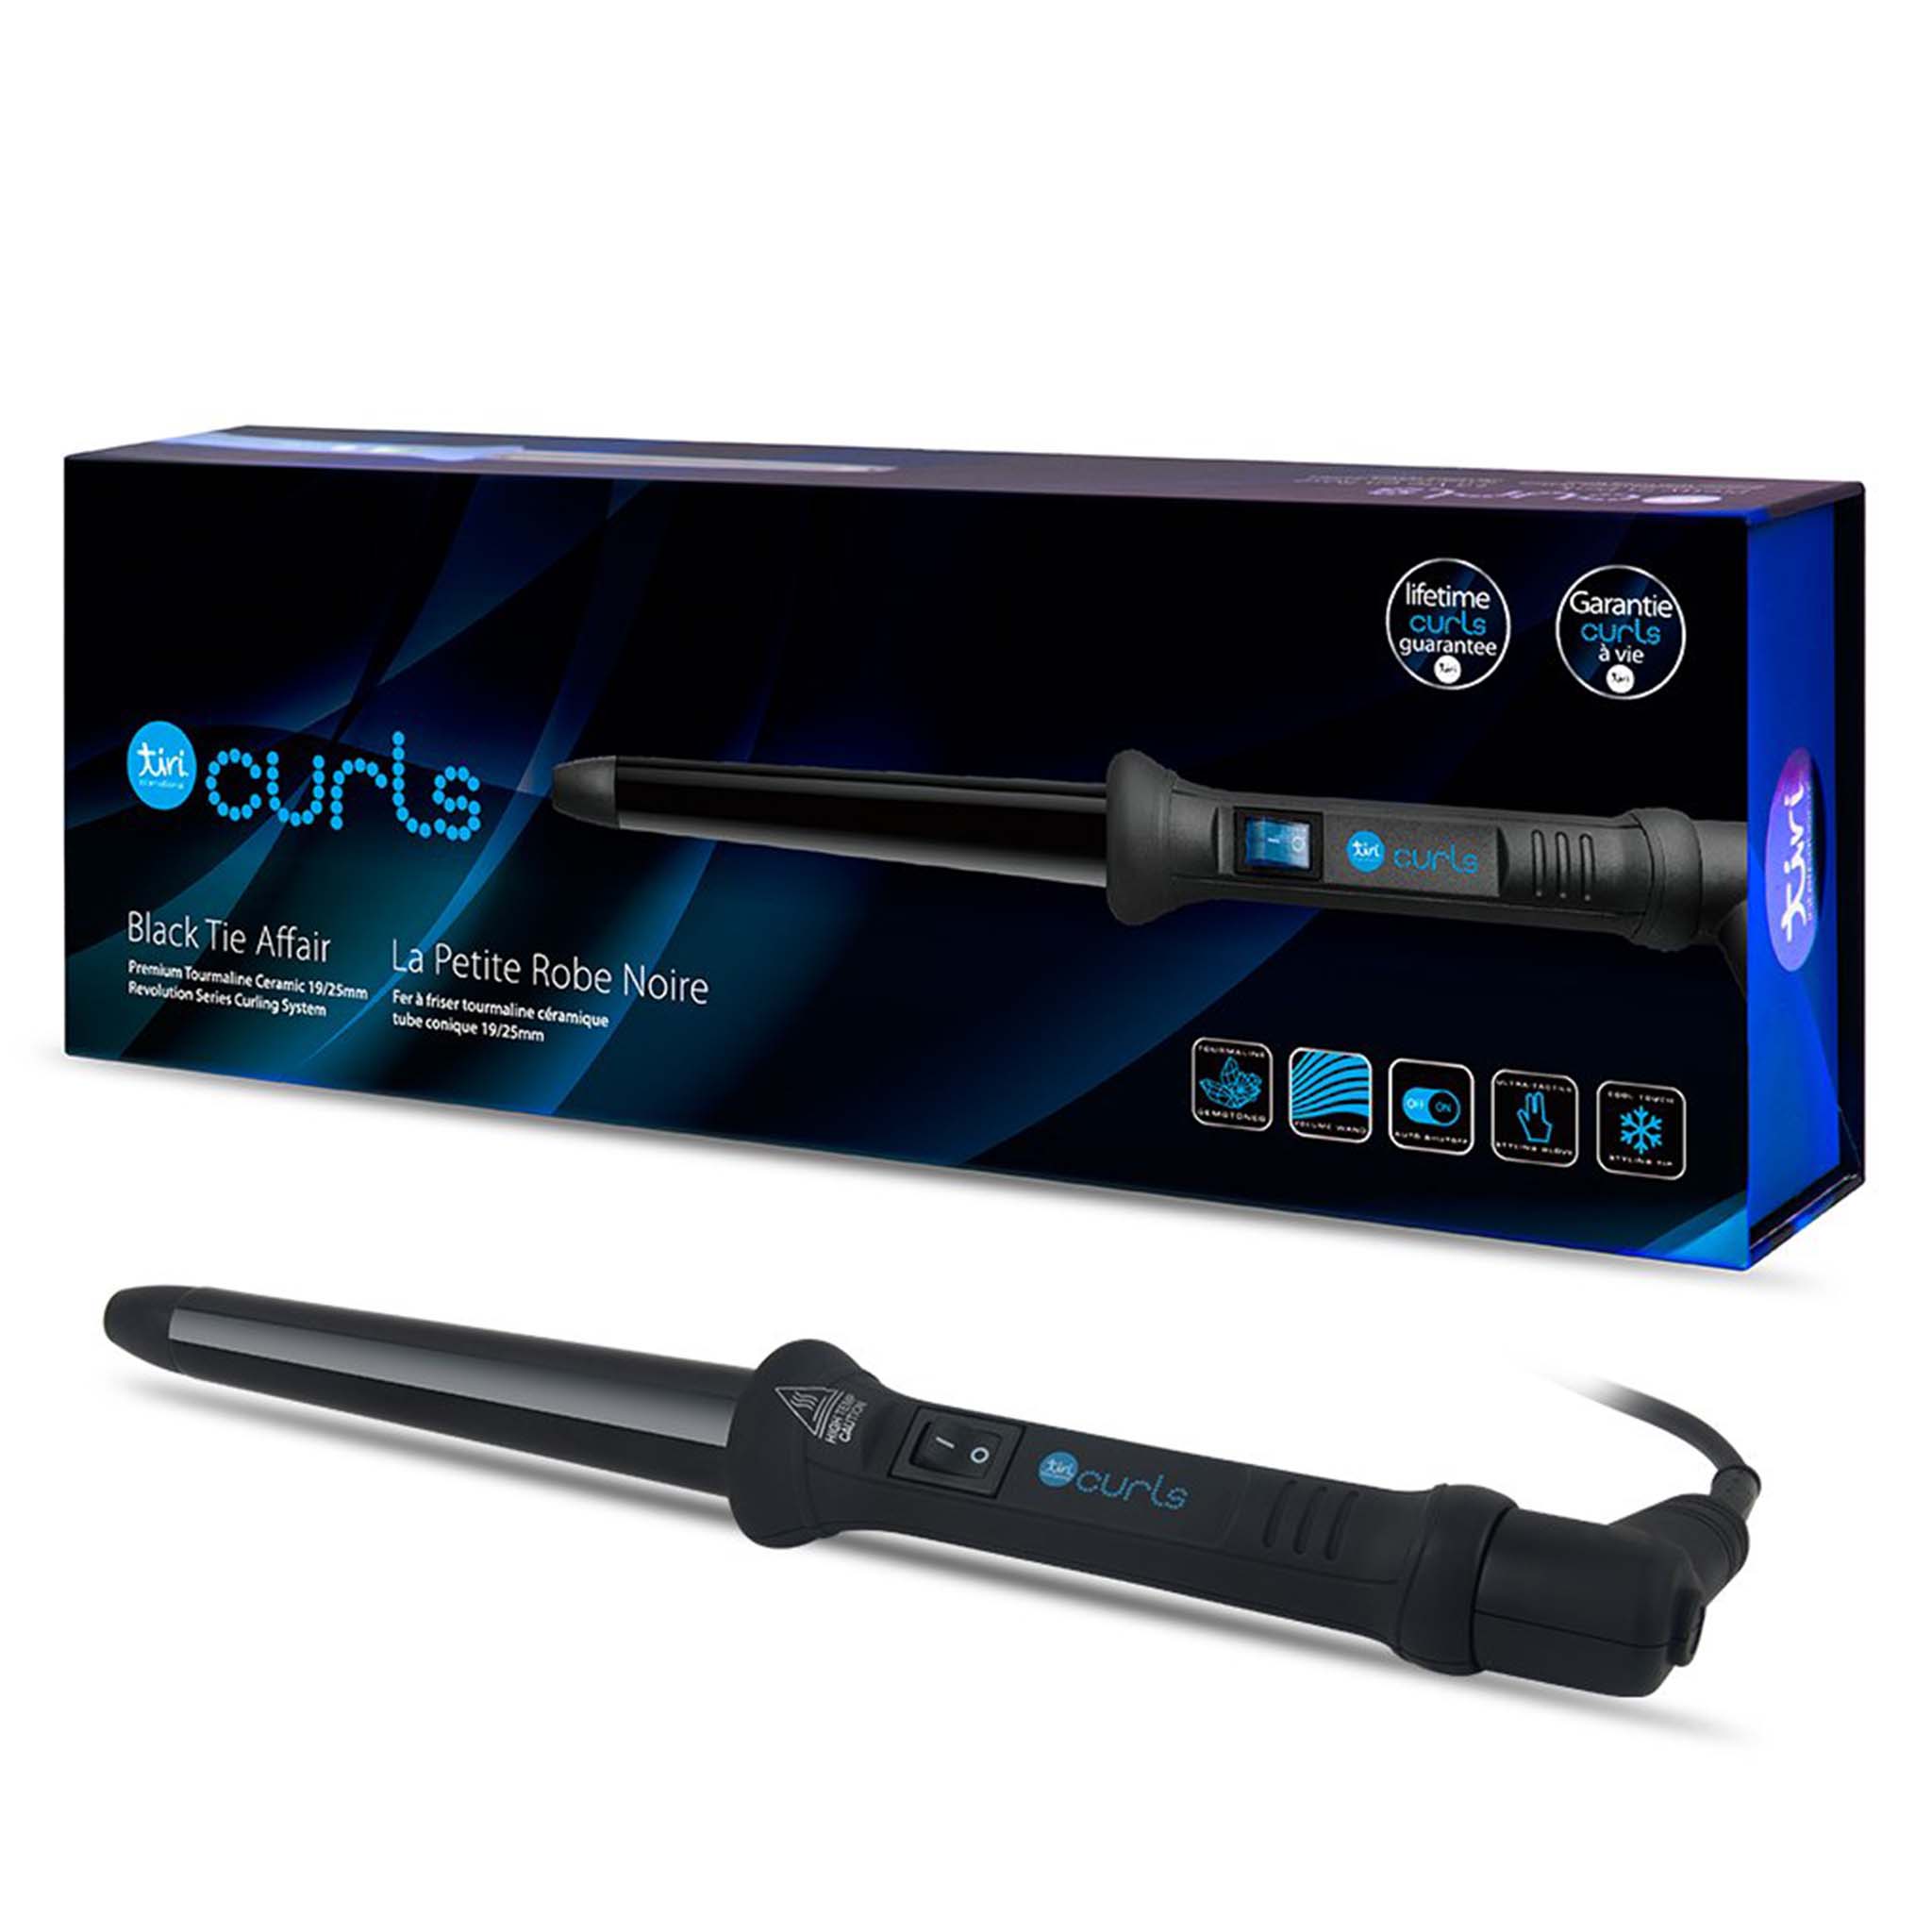 19mm/25mm Revolution Clipless Curling Iron with Heat Glove Included